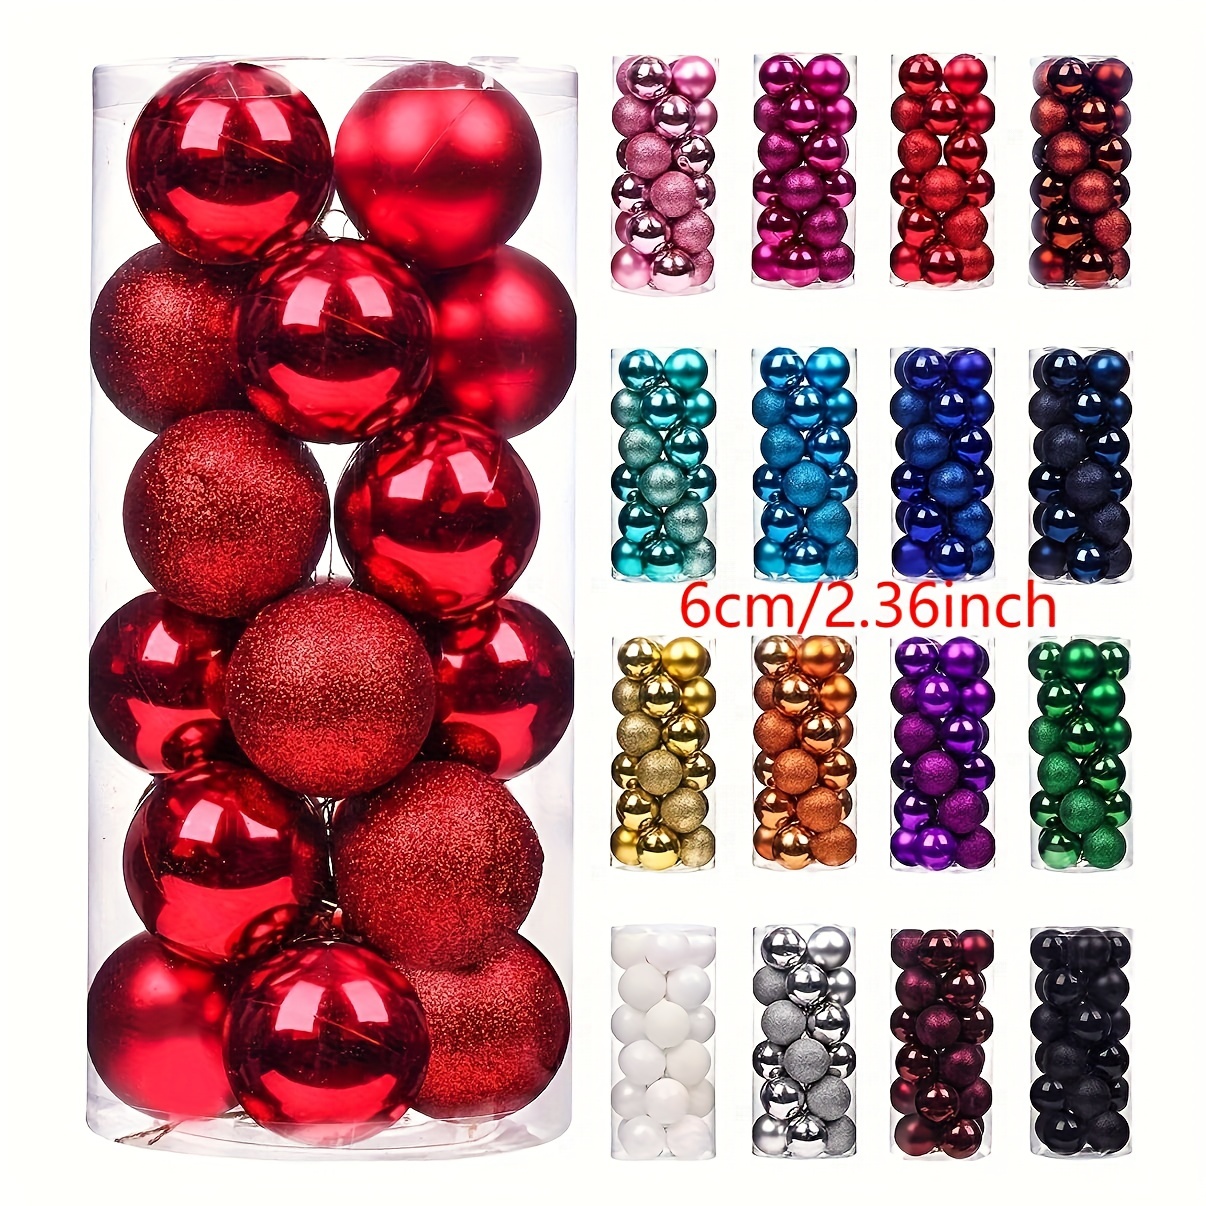 

24pcs 2.36inch Christmas Balls Ornaments For Xmas Christmas Tree Shatterproof Christmas Tree Decorations Hanging Ball For Holiday Wedding Party Decoration